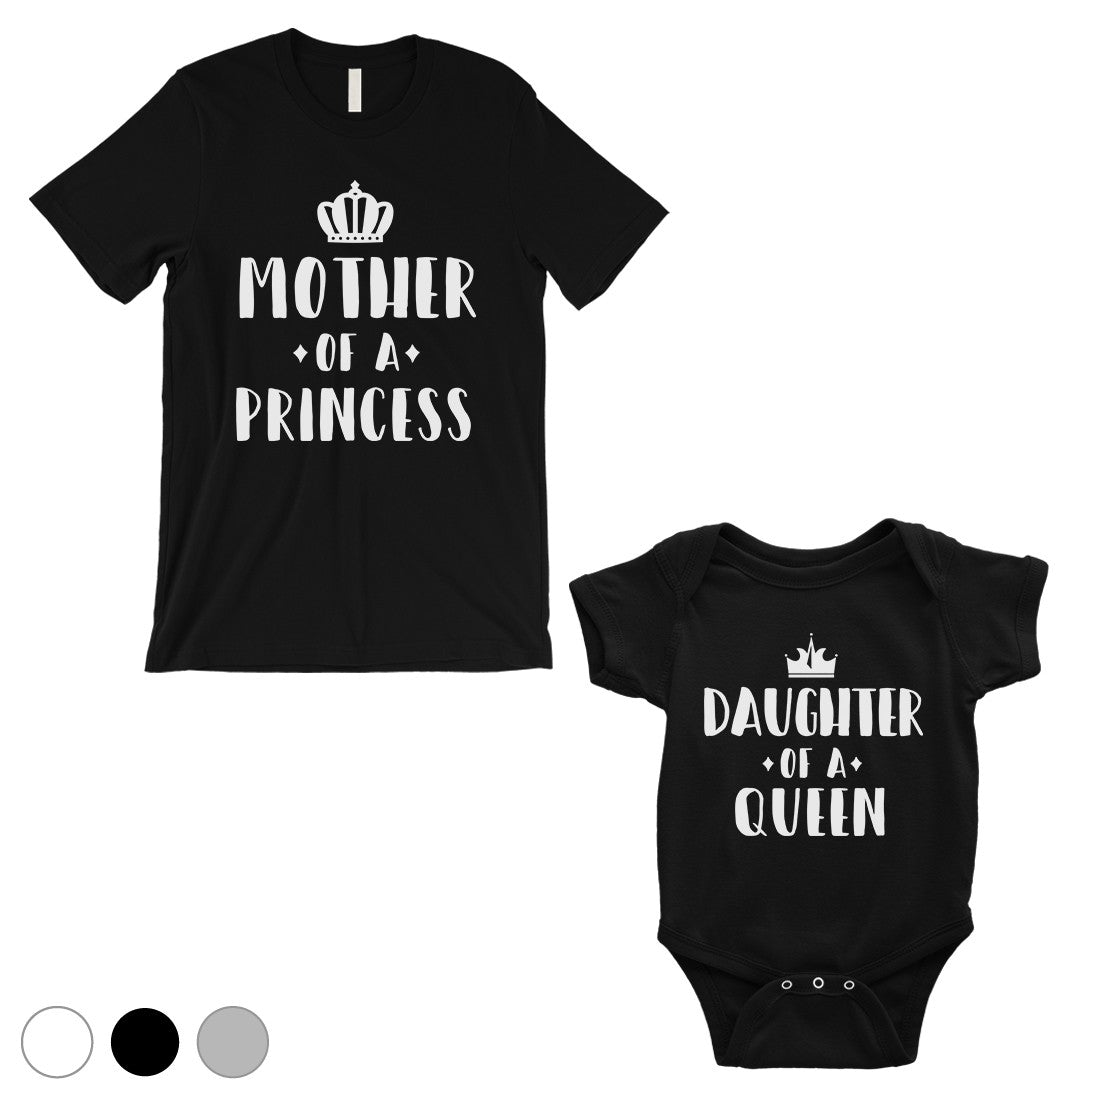 Queen Of Princess Mom Baby Matching T-Shirts Black Mothers Day Gifts